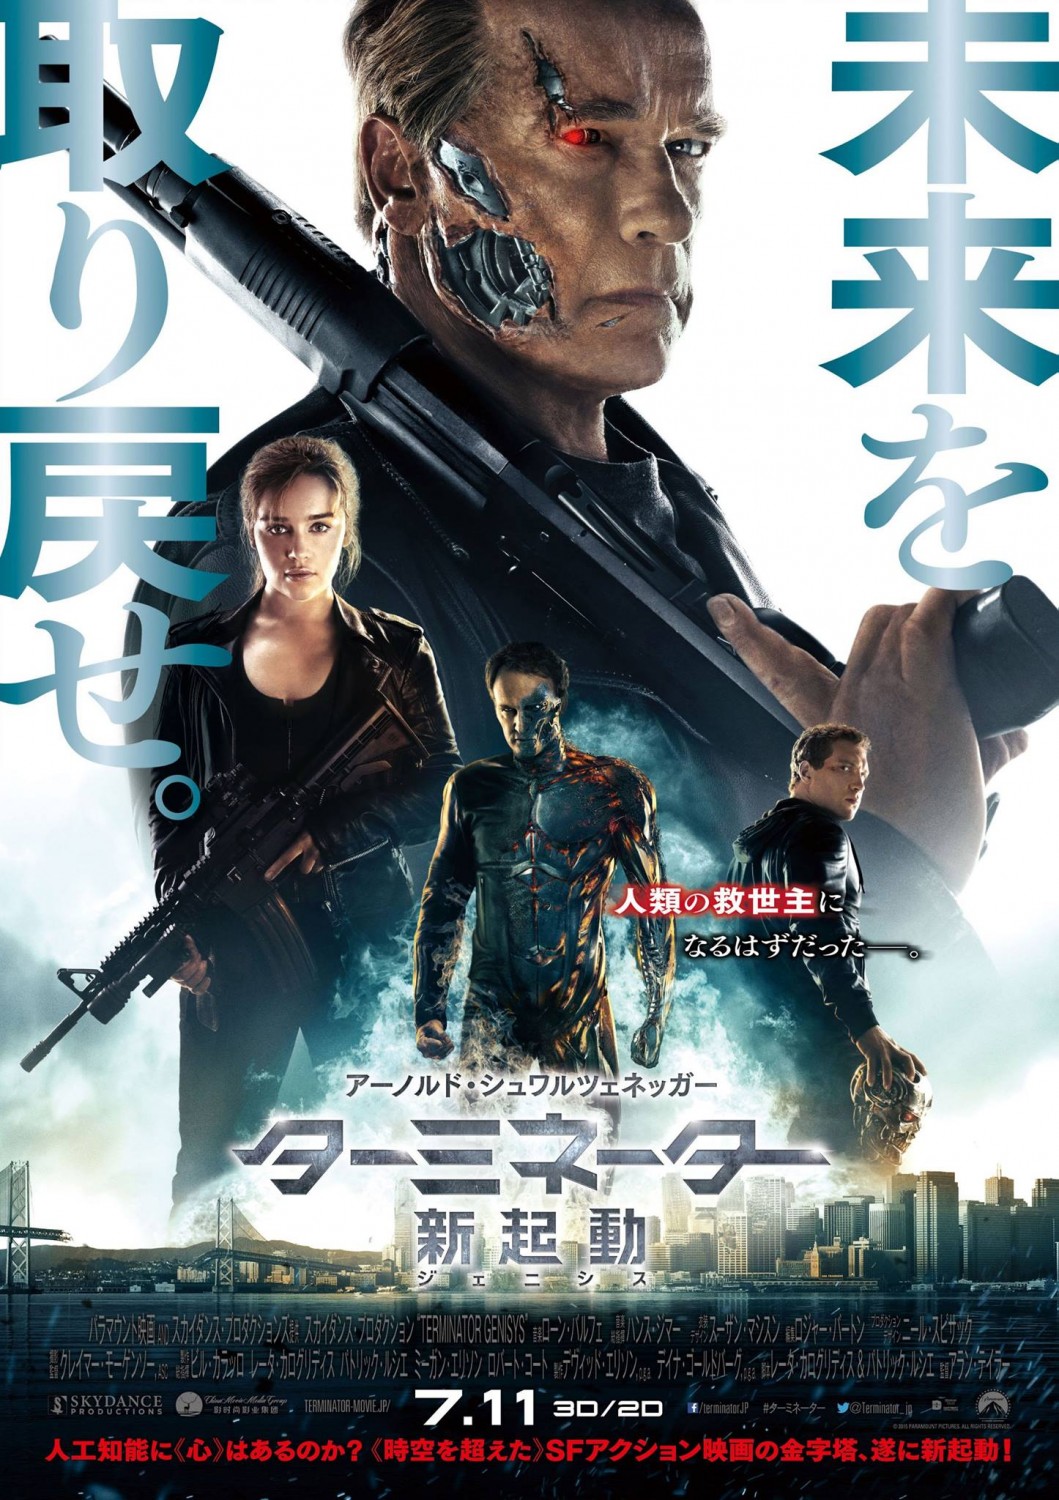 Extra Large Movie Poster Image for Terminator Genisys (#13 of 16)